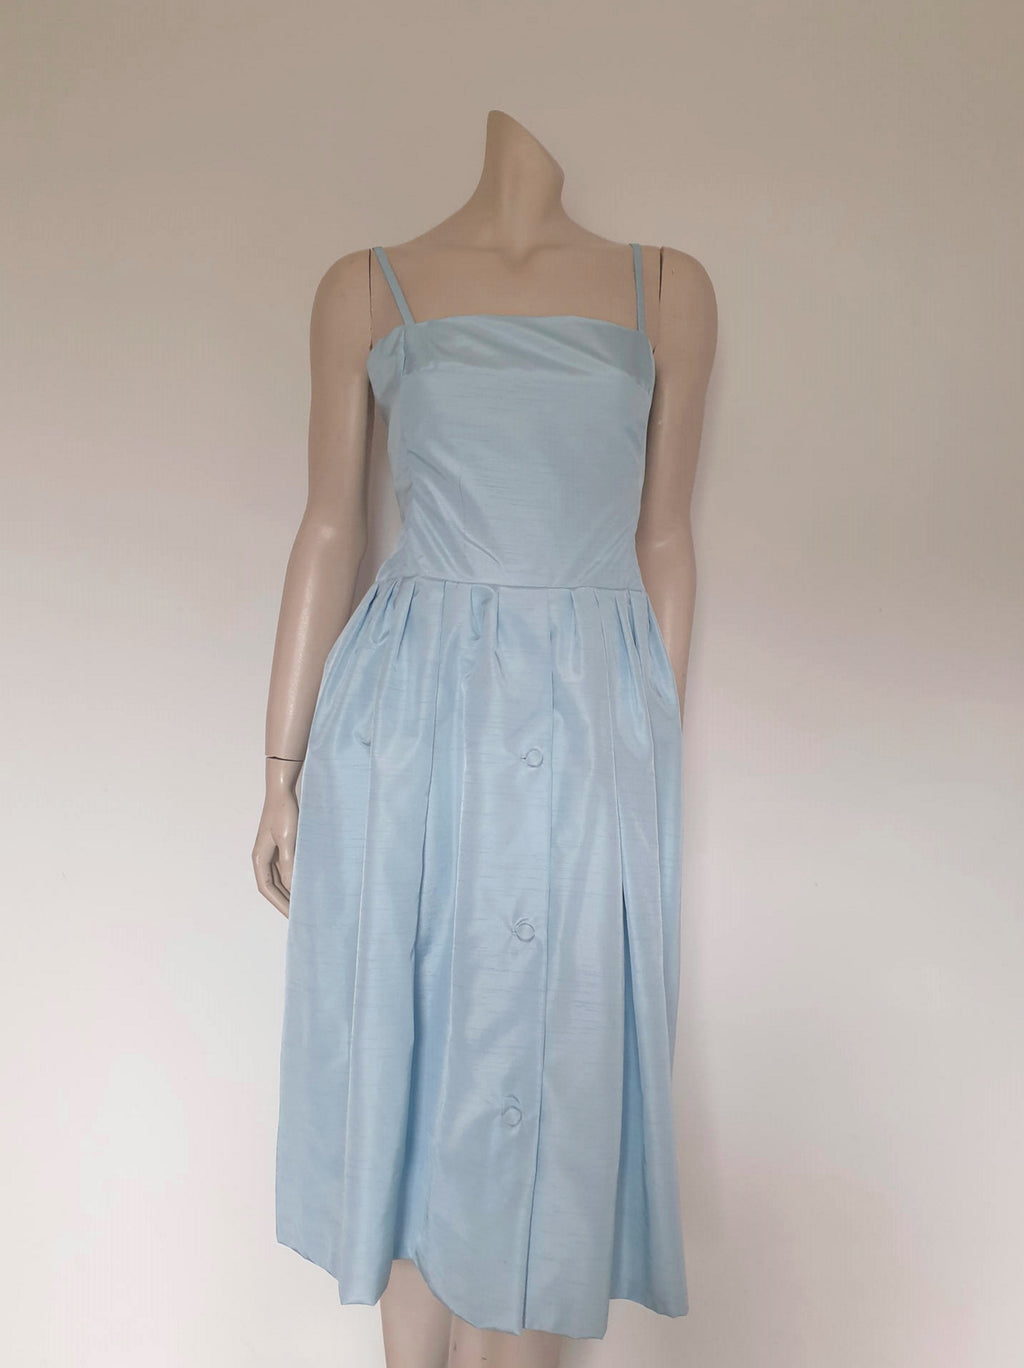 1970s vintage light blue faux silk dress with buttoning skirt